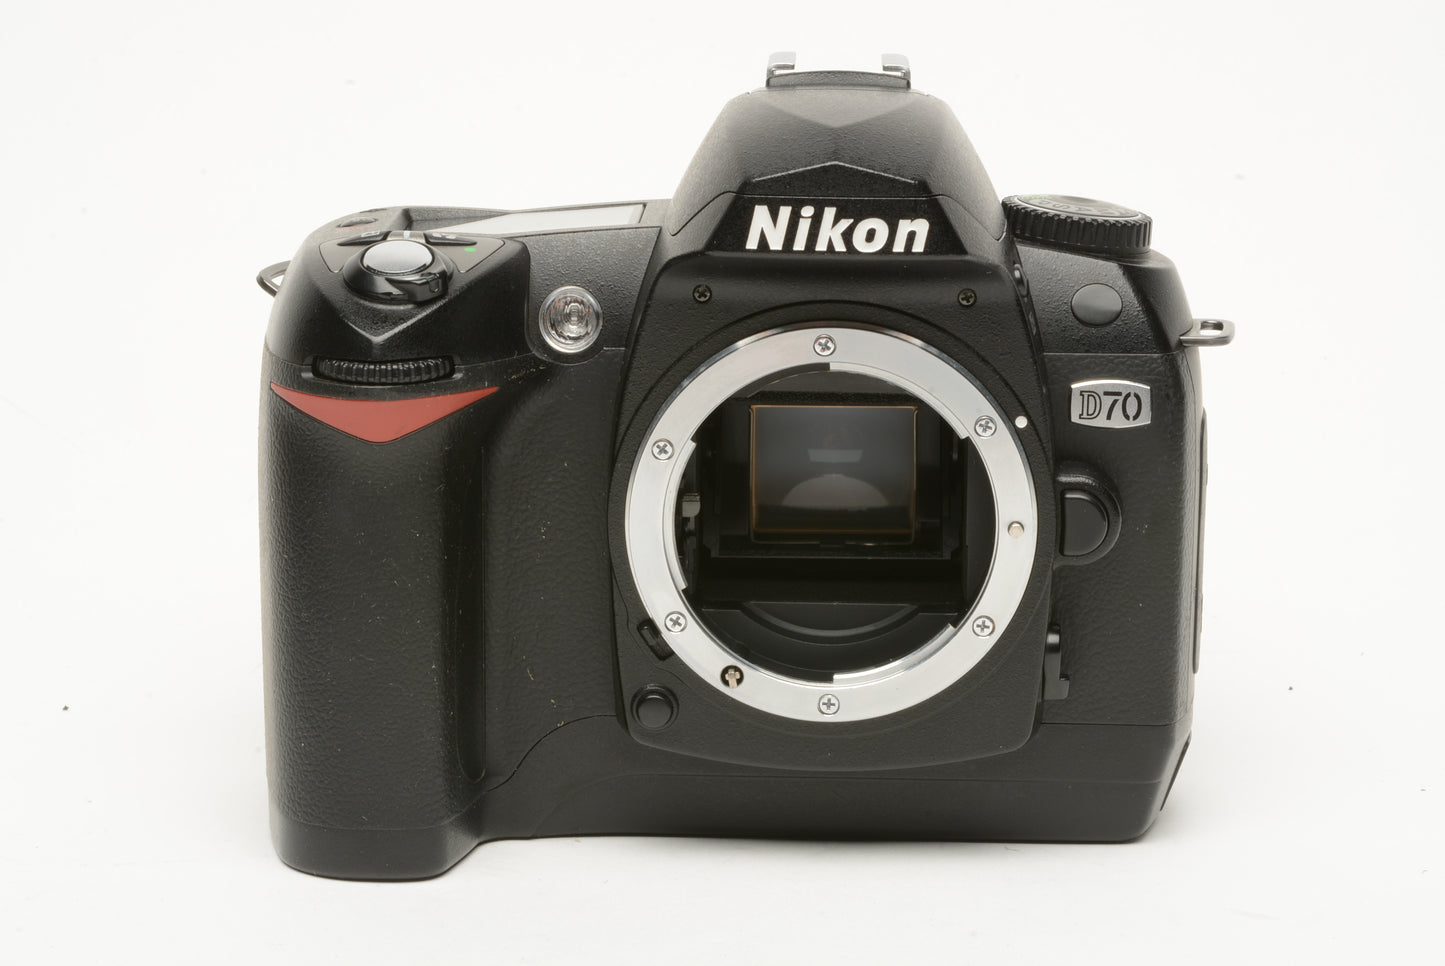 Nikon D70 DSLR body w/2batts, charger, strap, 4GB CF, LCD cover Only 4524 Acts